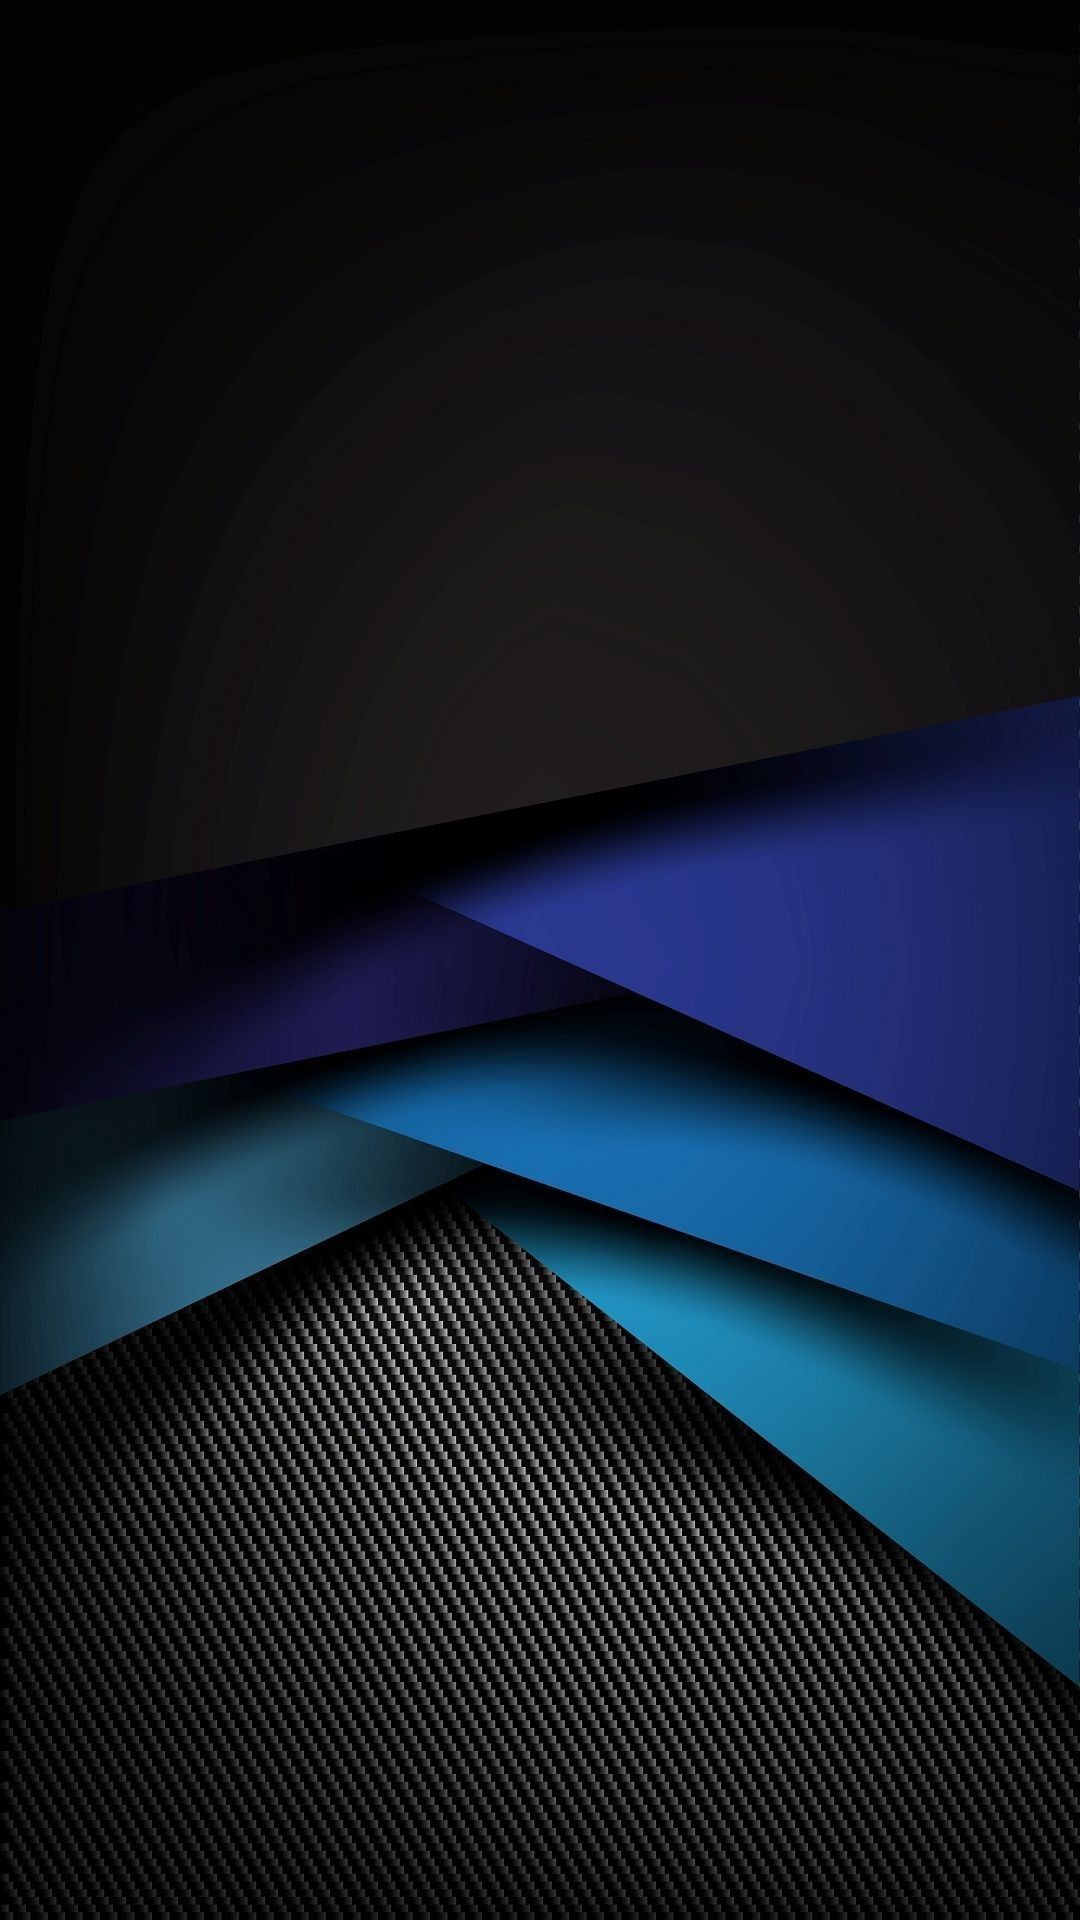 1080x1920, Black And Blue Geometric Abstract Wallpaper - Blue And Black Abstract - HD Wallpaper 